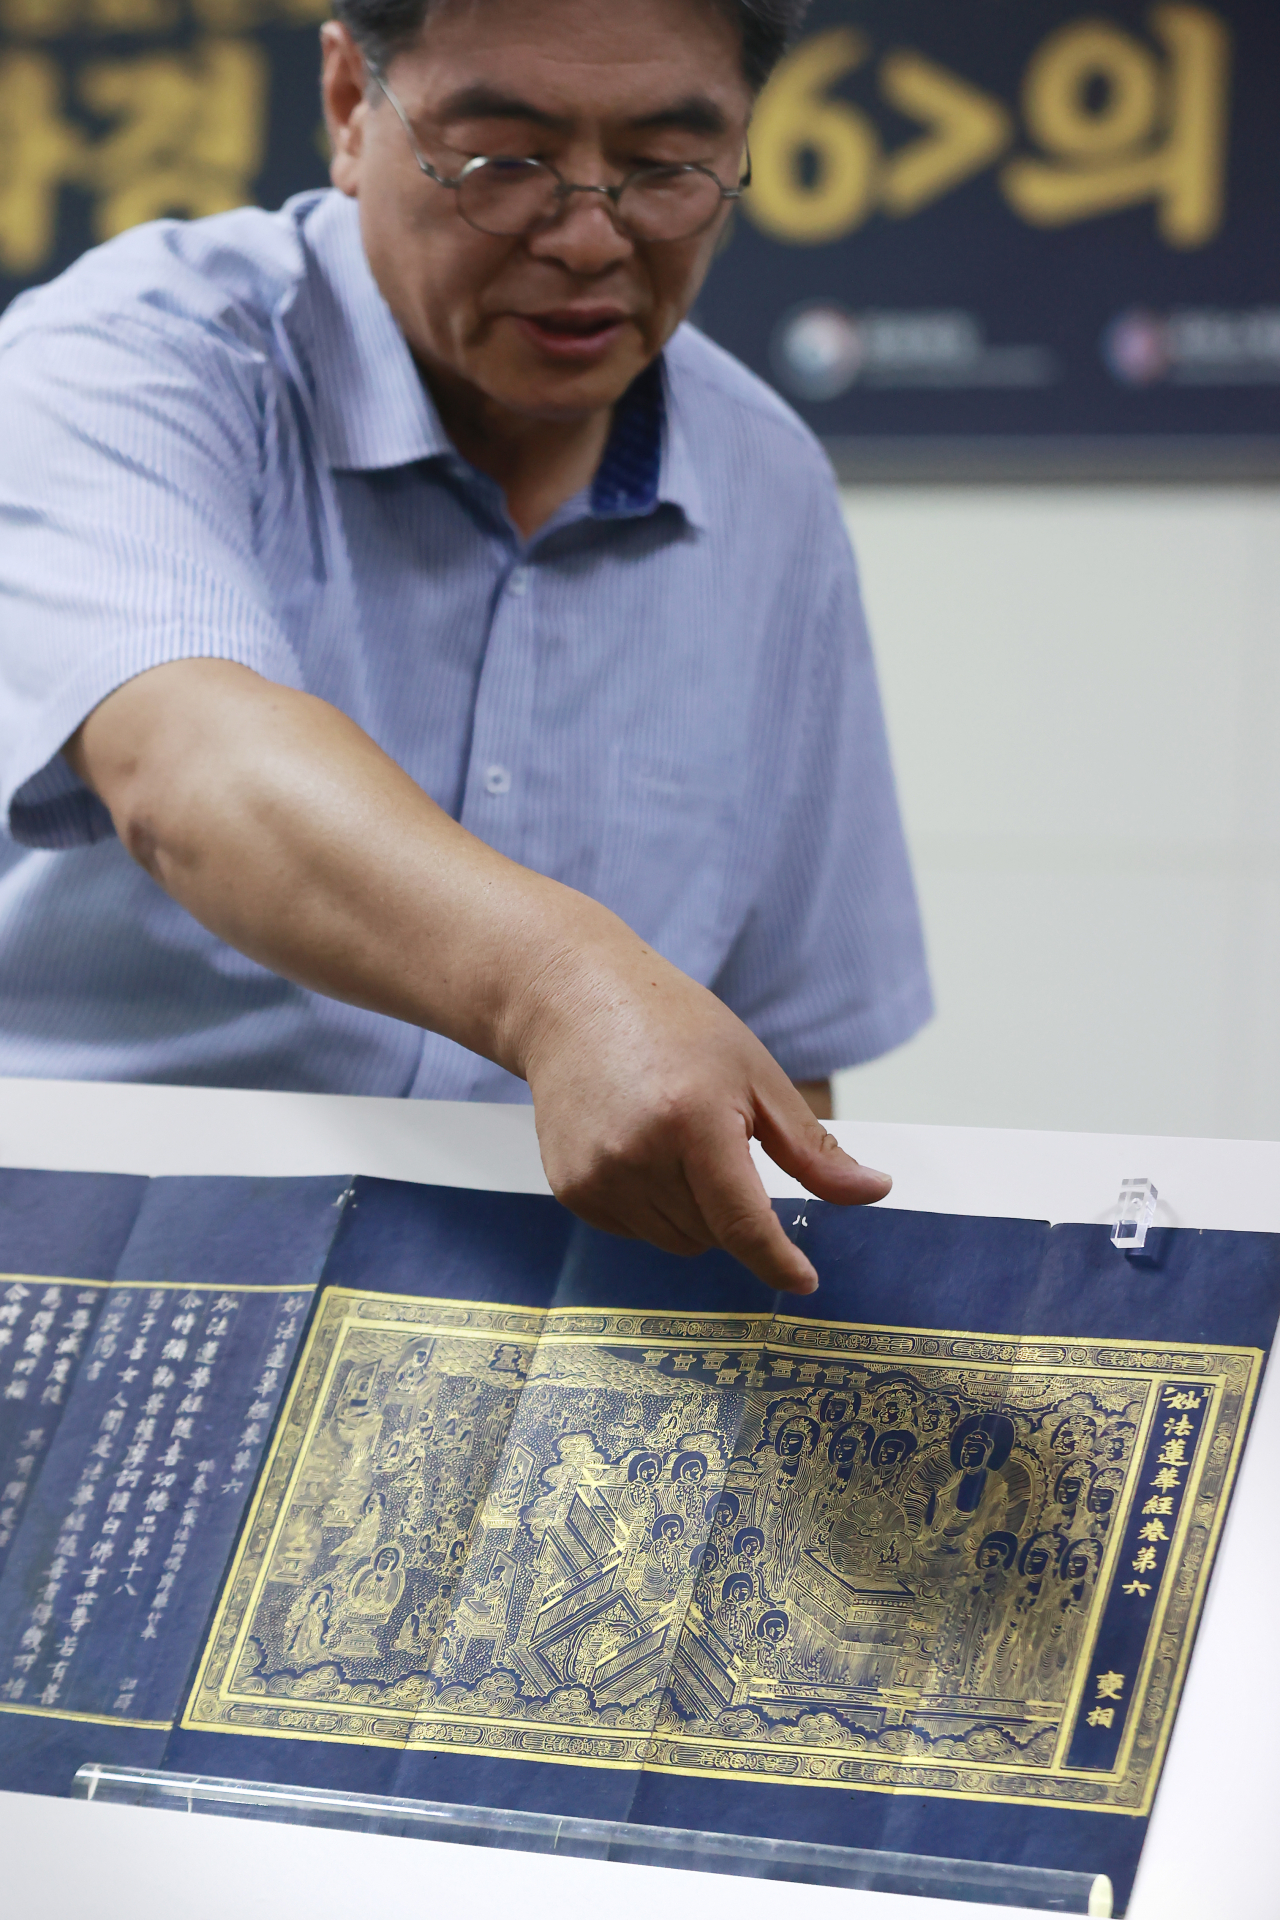 Bae Young-il, director of the Seongbo Museum at Magok Temple, points to an illustration inside Vol. 6 of Saddharmapundarika Sutra, during a press event held at the National Palace Museum of Korea, Thursday. (Yonhap)